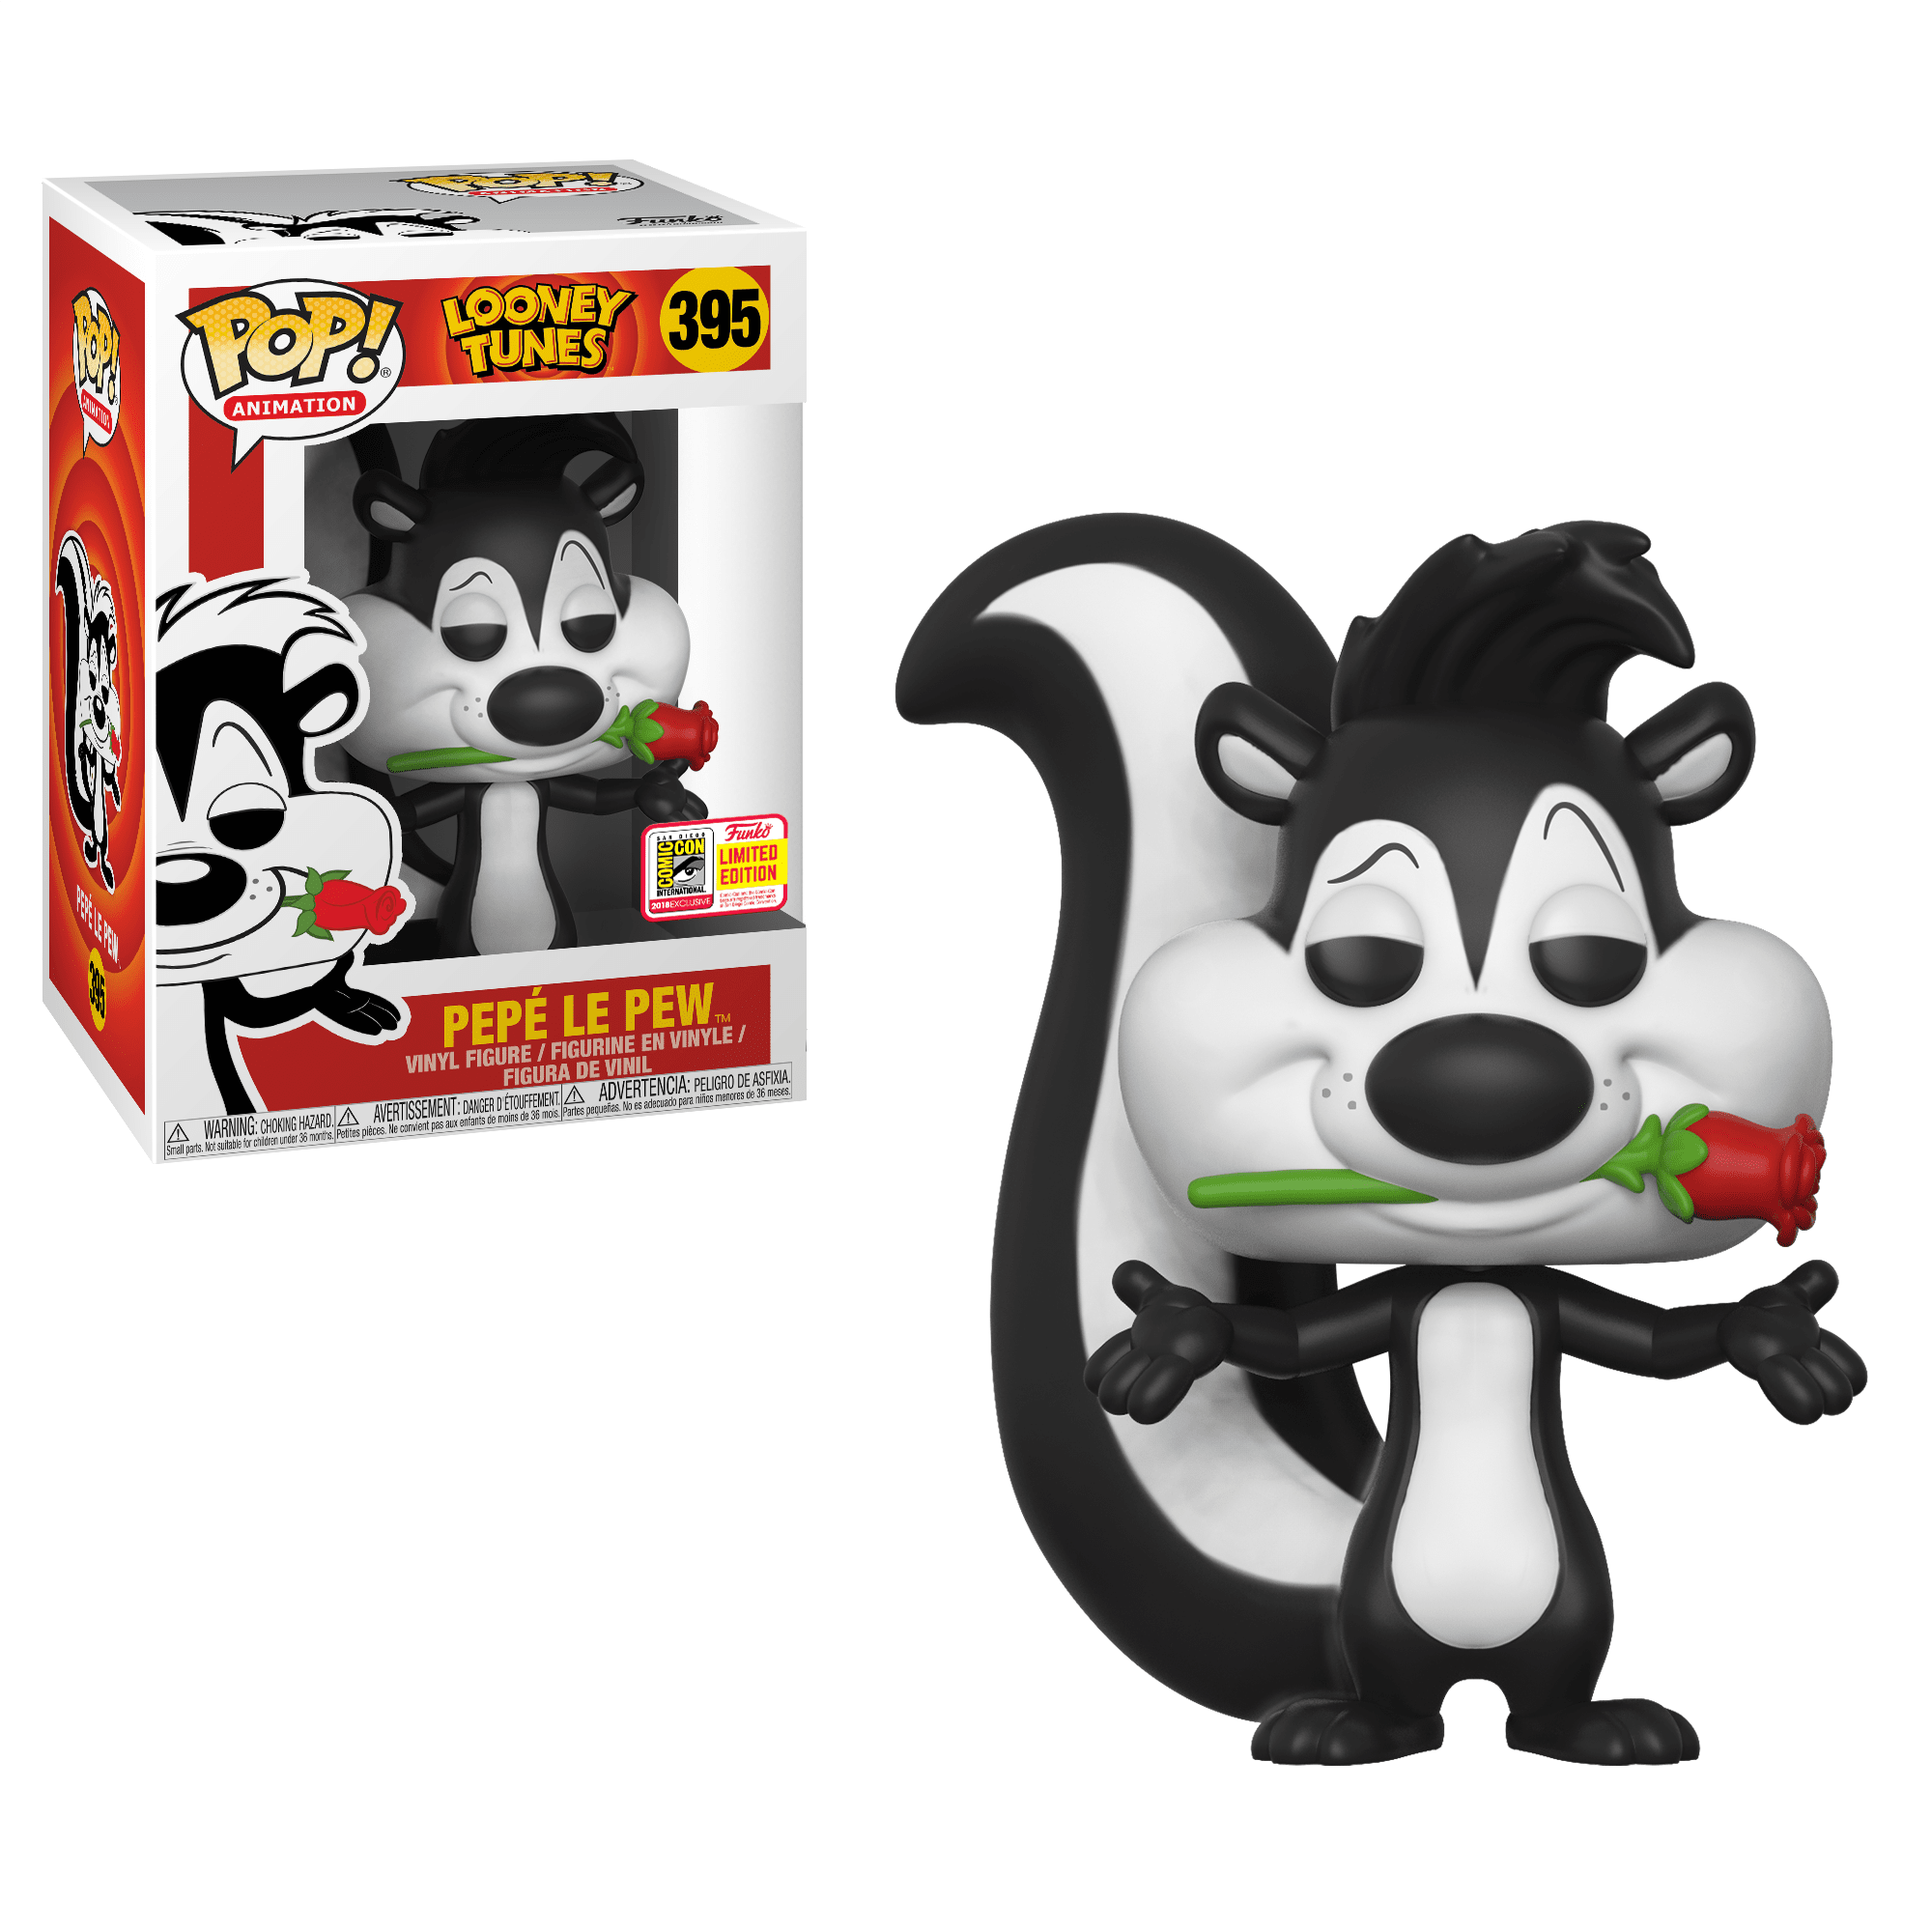 Funko Pop! Pepe Le Pew (Warner Brothers Animation)